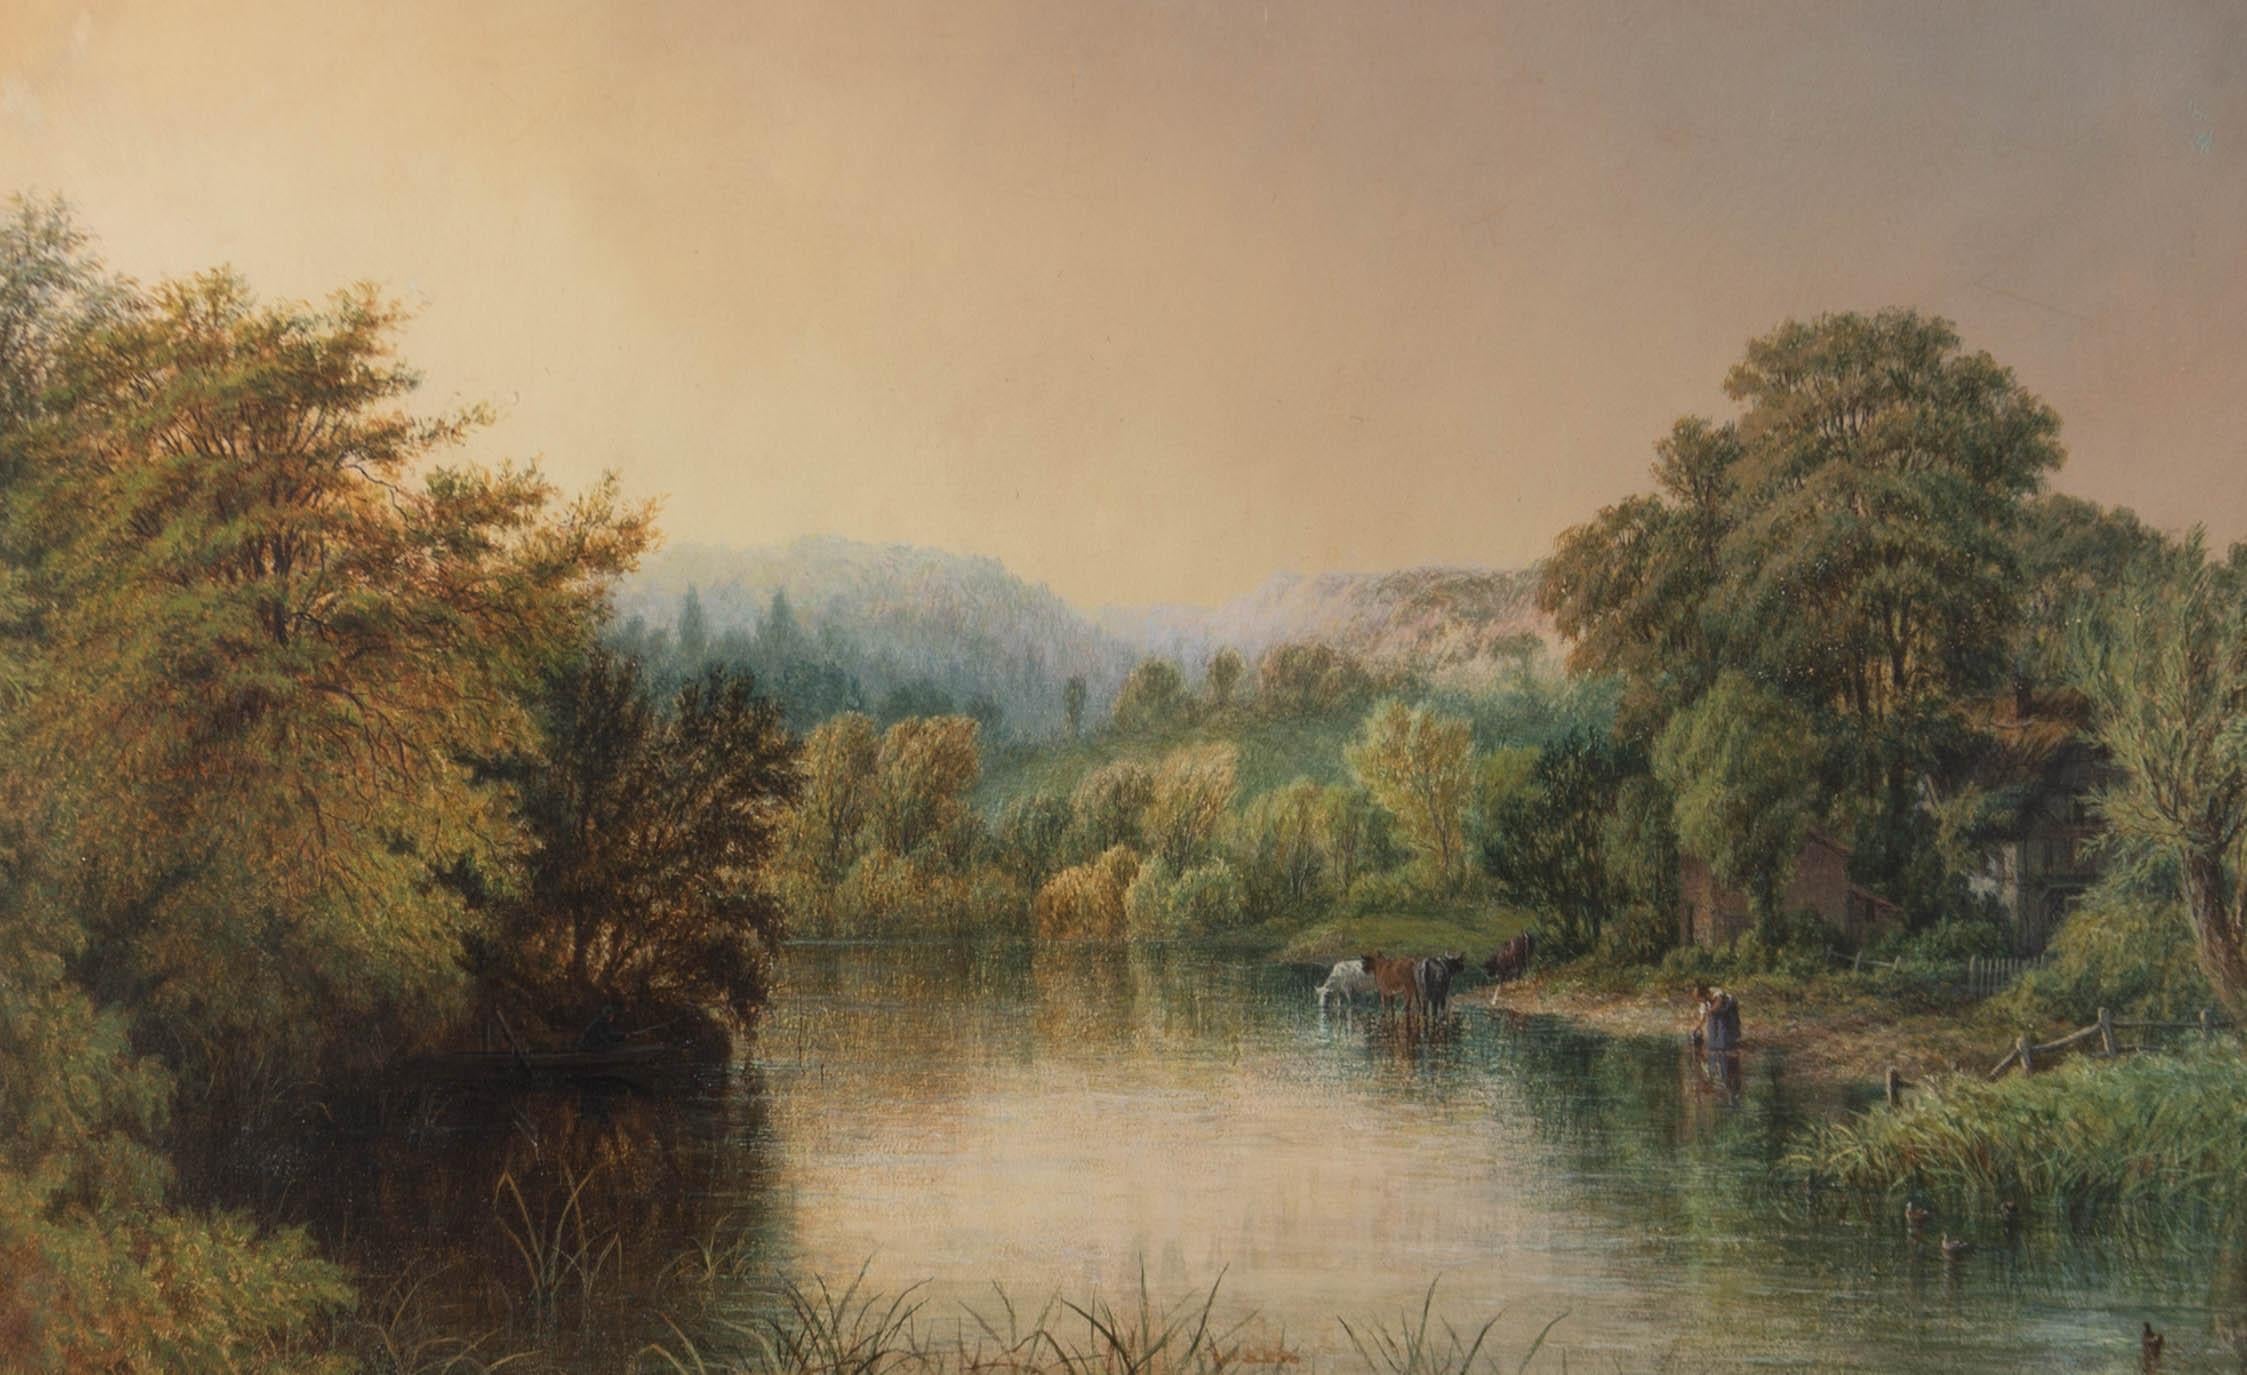 A fine pastoral river scene. To the right side of the composition, cows stand in shallow water while a woman fills a jug on the waterside. A thatched cottage is visible through the trees behind her. The landscape is bathed in a soft light which